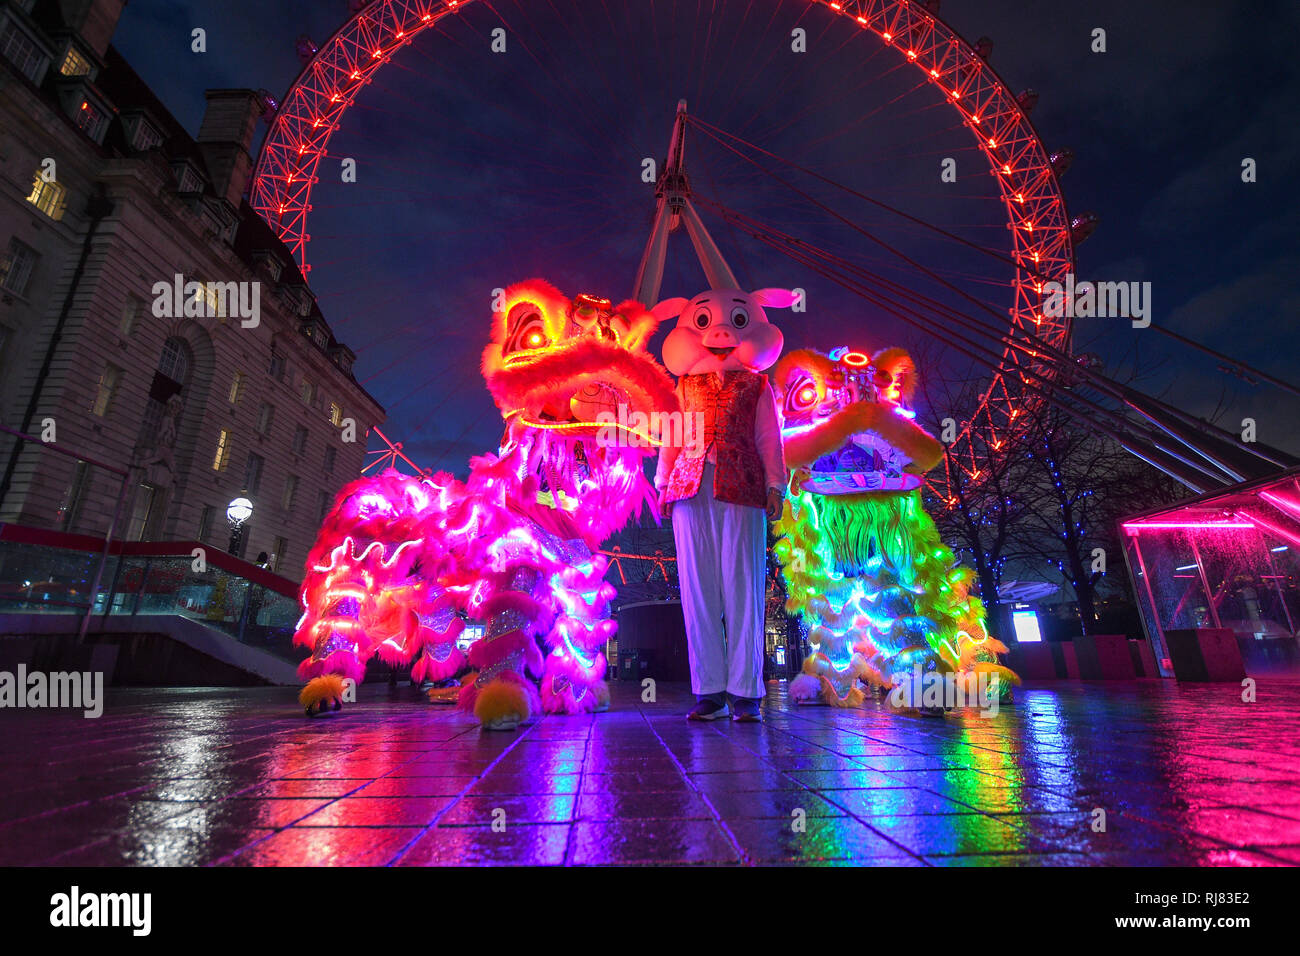 Chinese new year at the London Eye, its the year of the pig and the eye turned red and gold to celebrate the new year. LCCA Festival of Spring Celebrations in London. Stock Photo